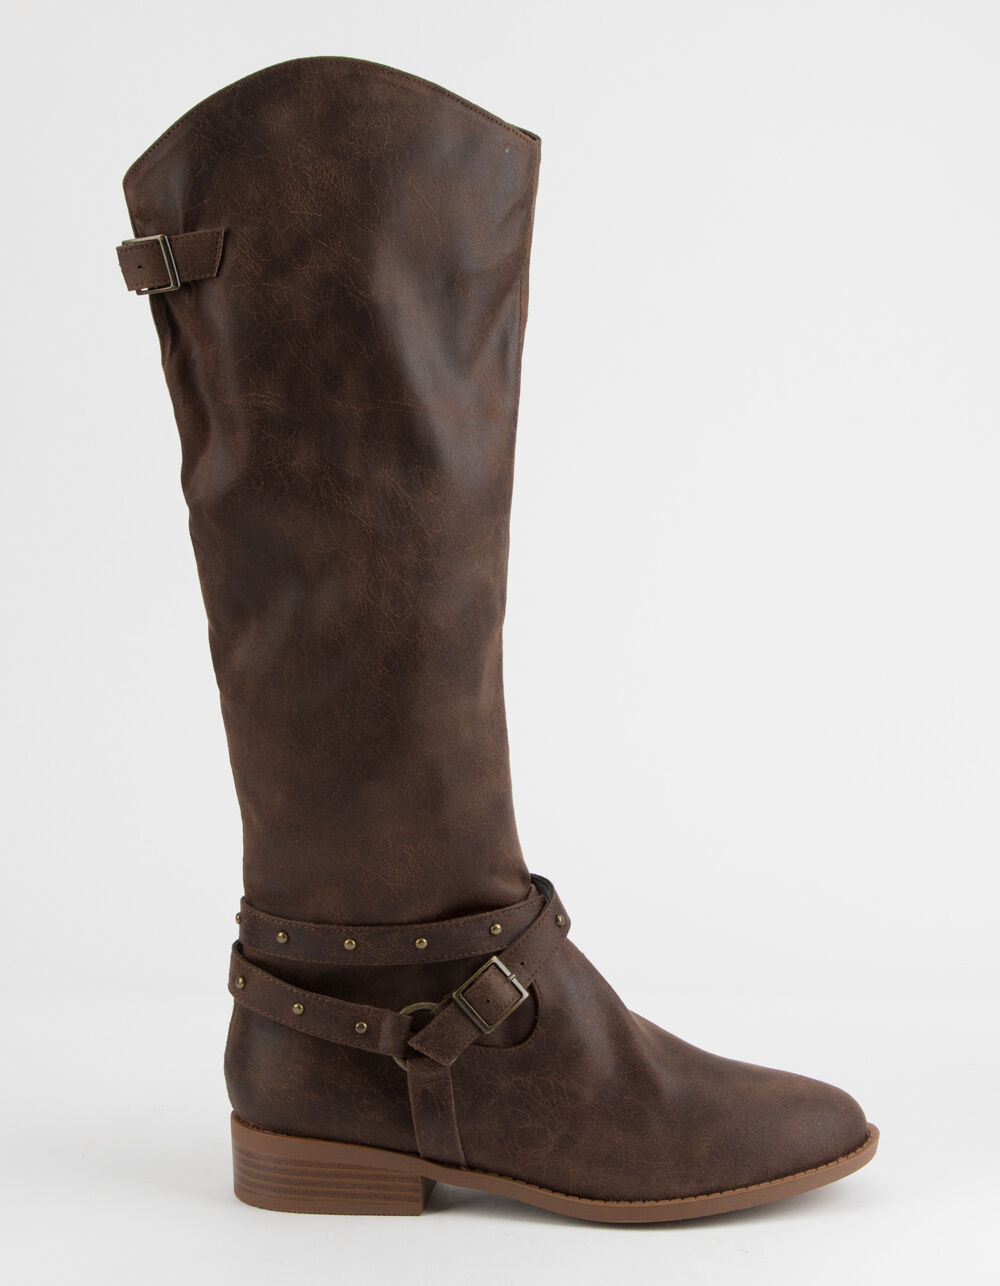 QUPID Zion Womens Boots - BROWN | Tillys